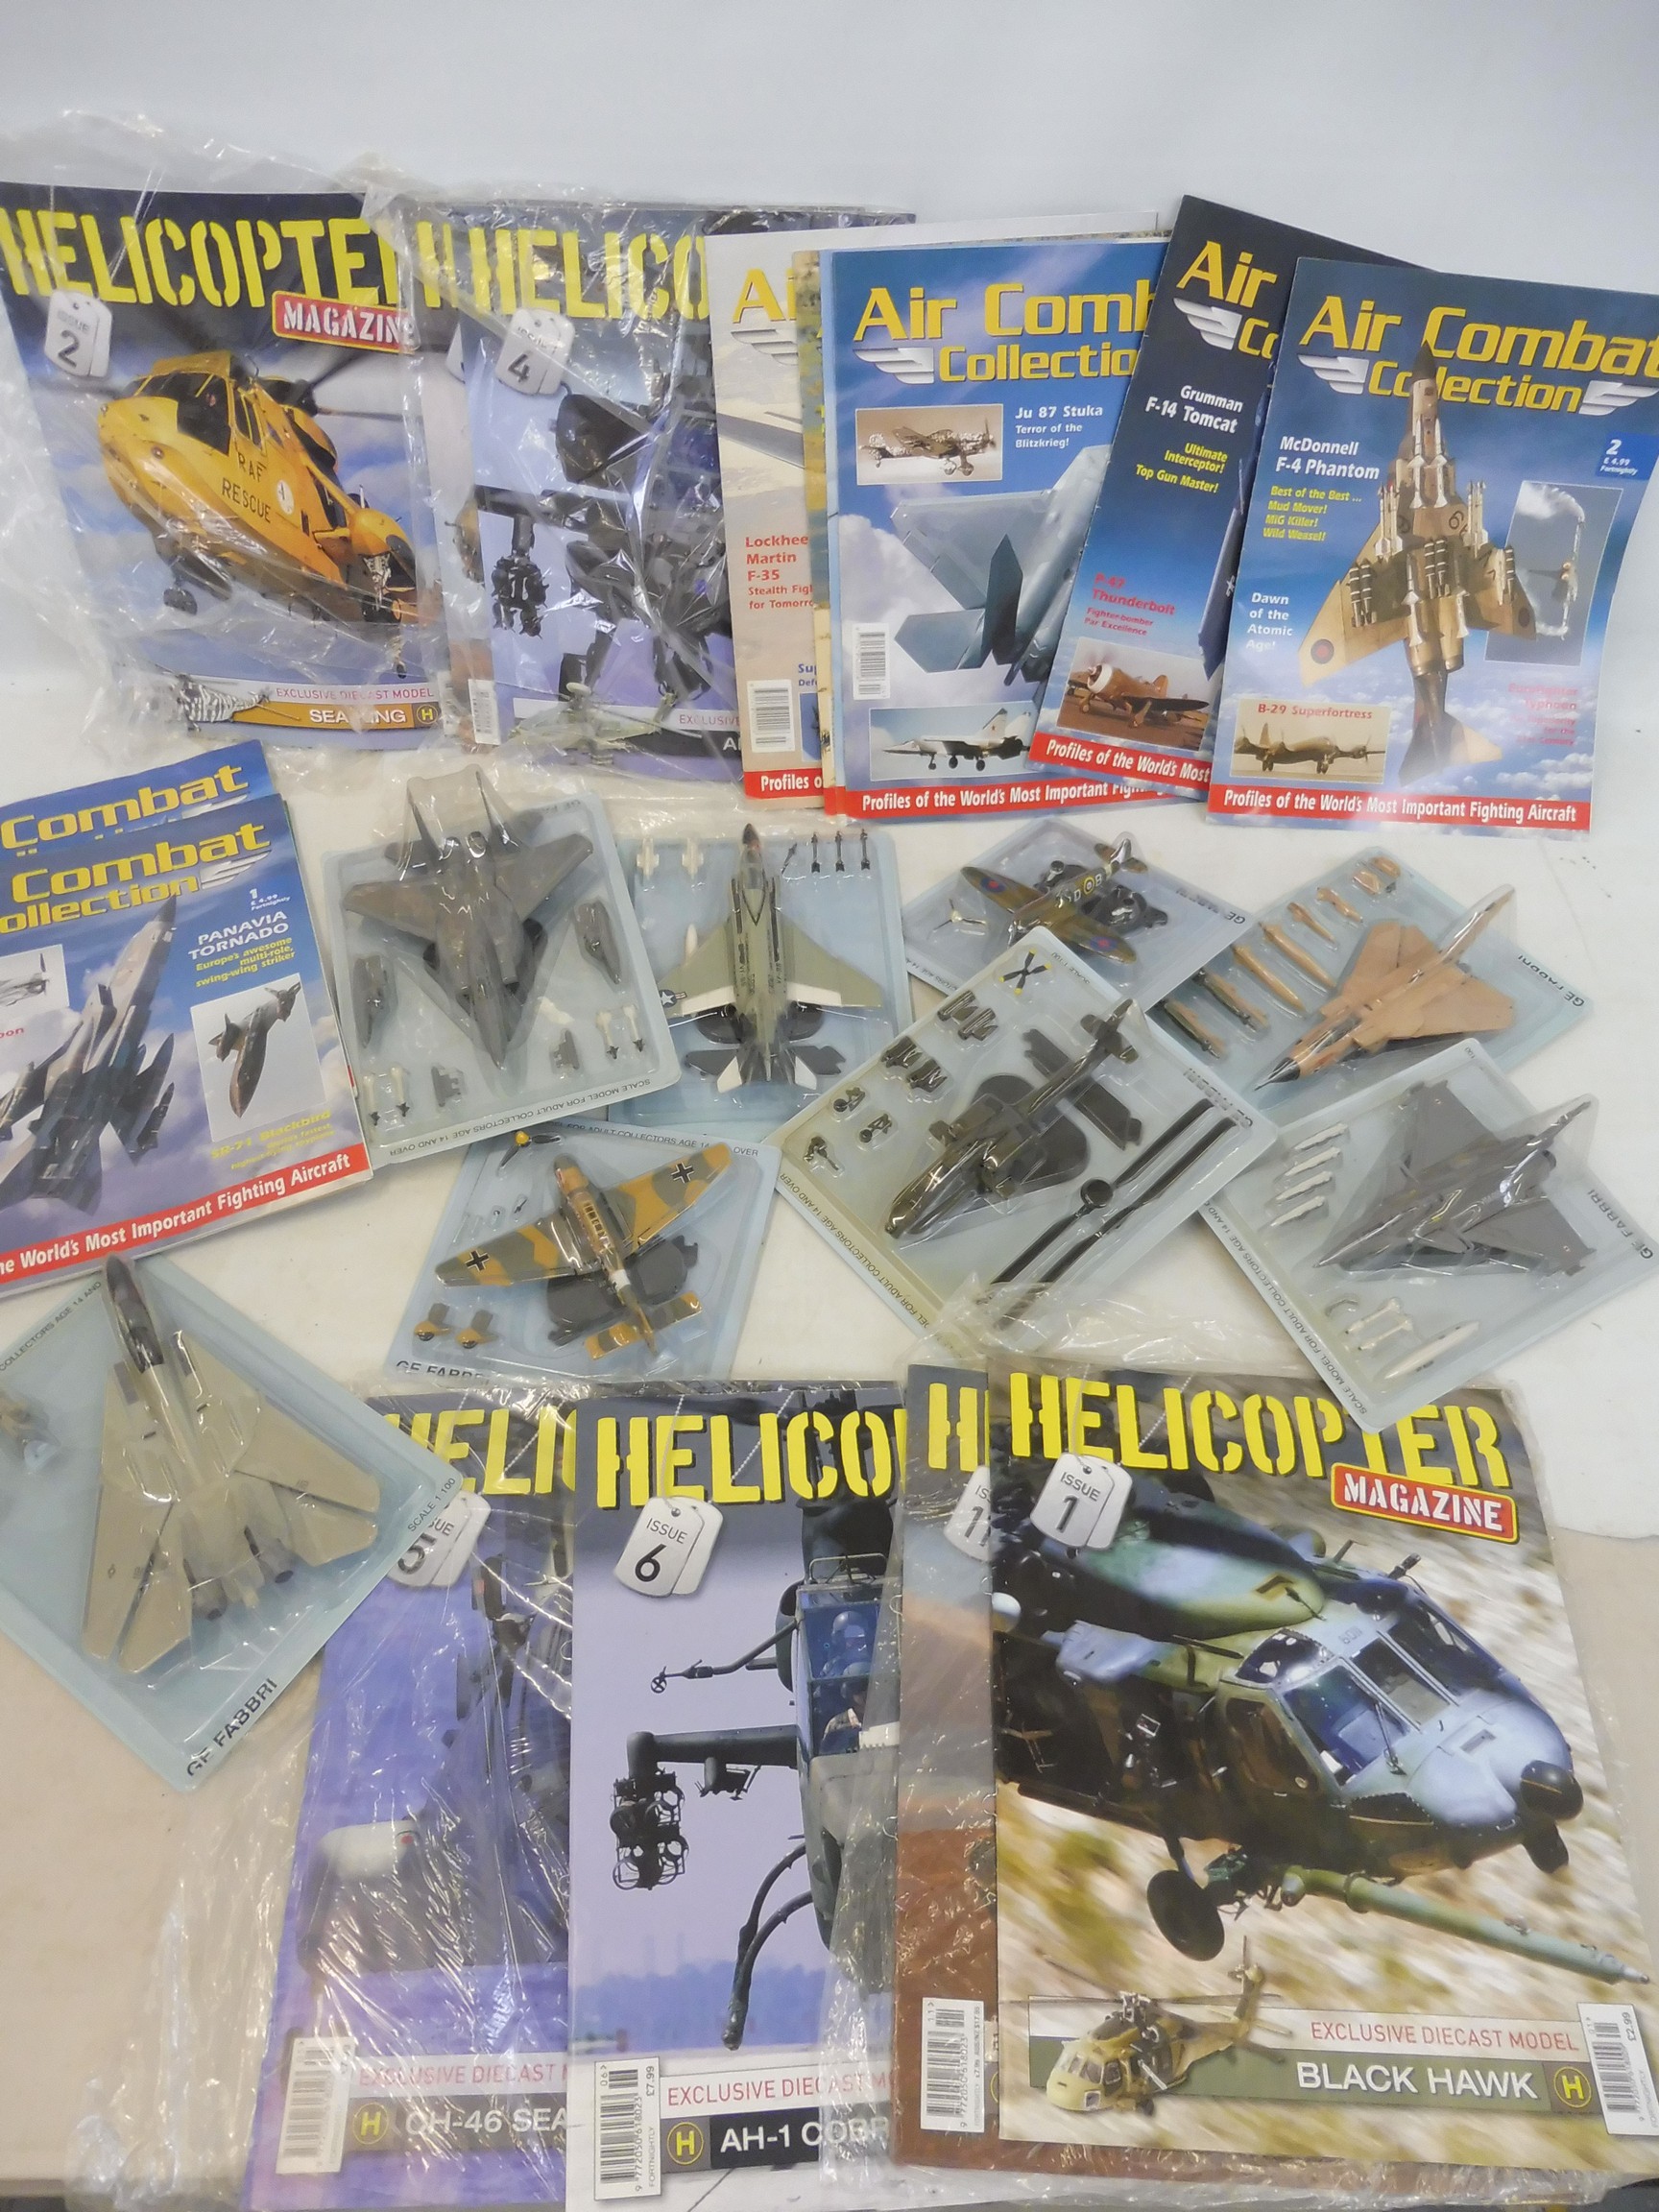 A selection of military aircraft models from the Air Combat Collection.